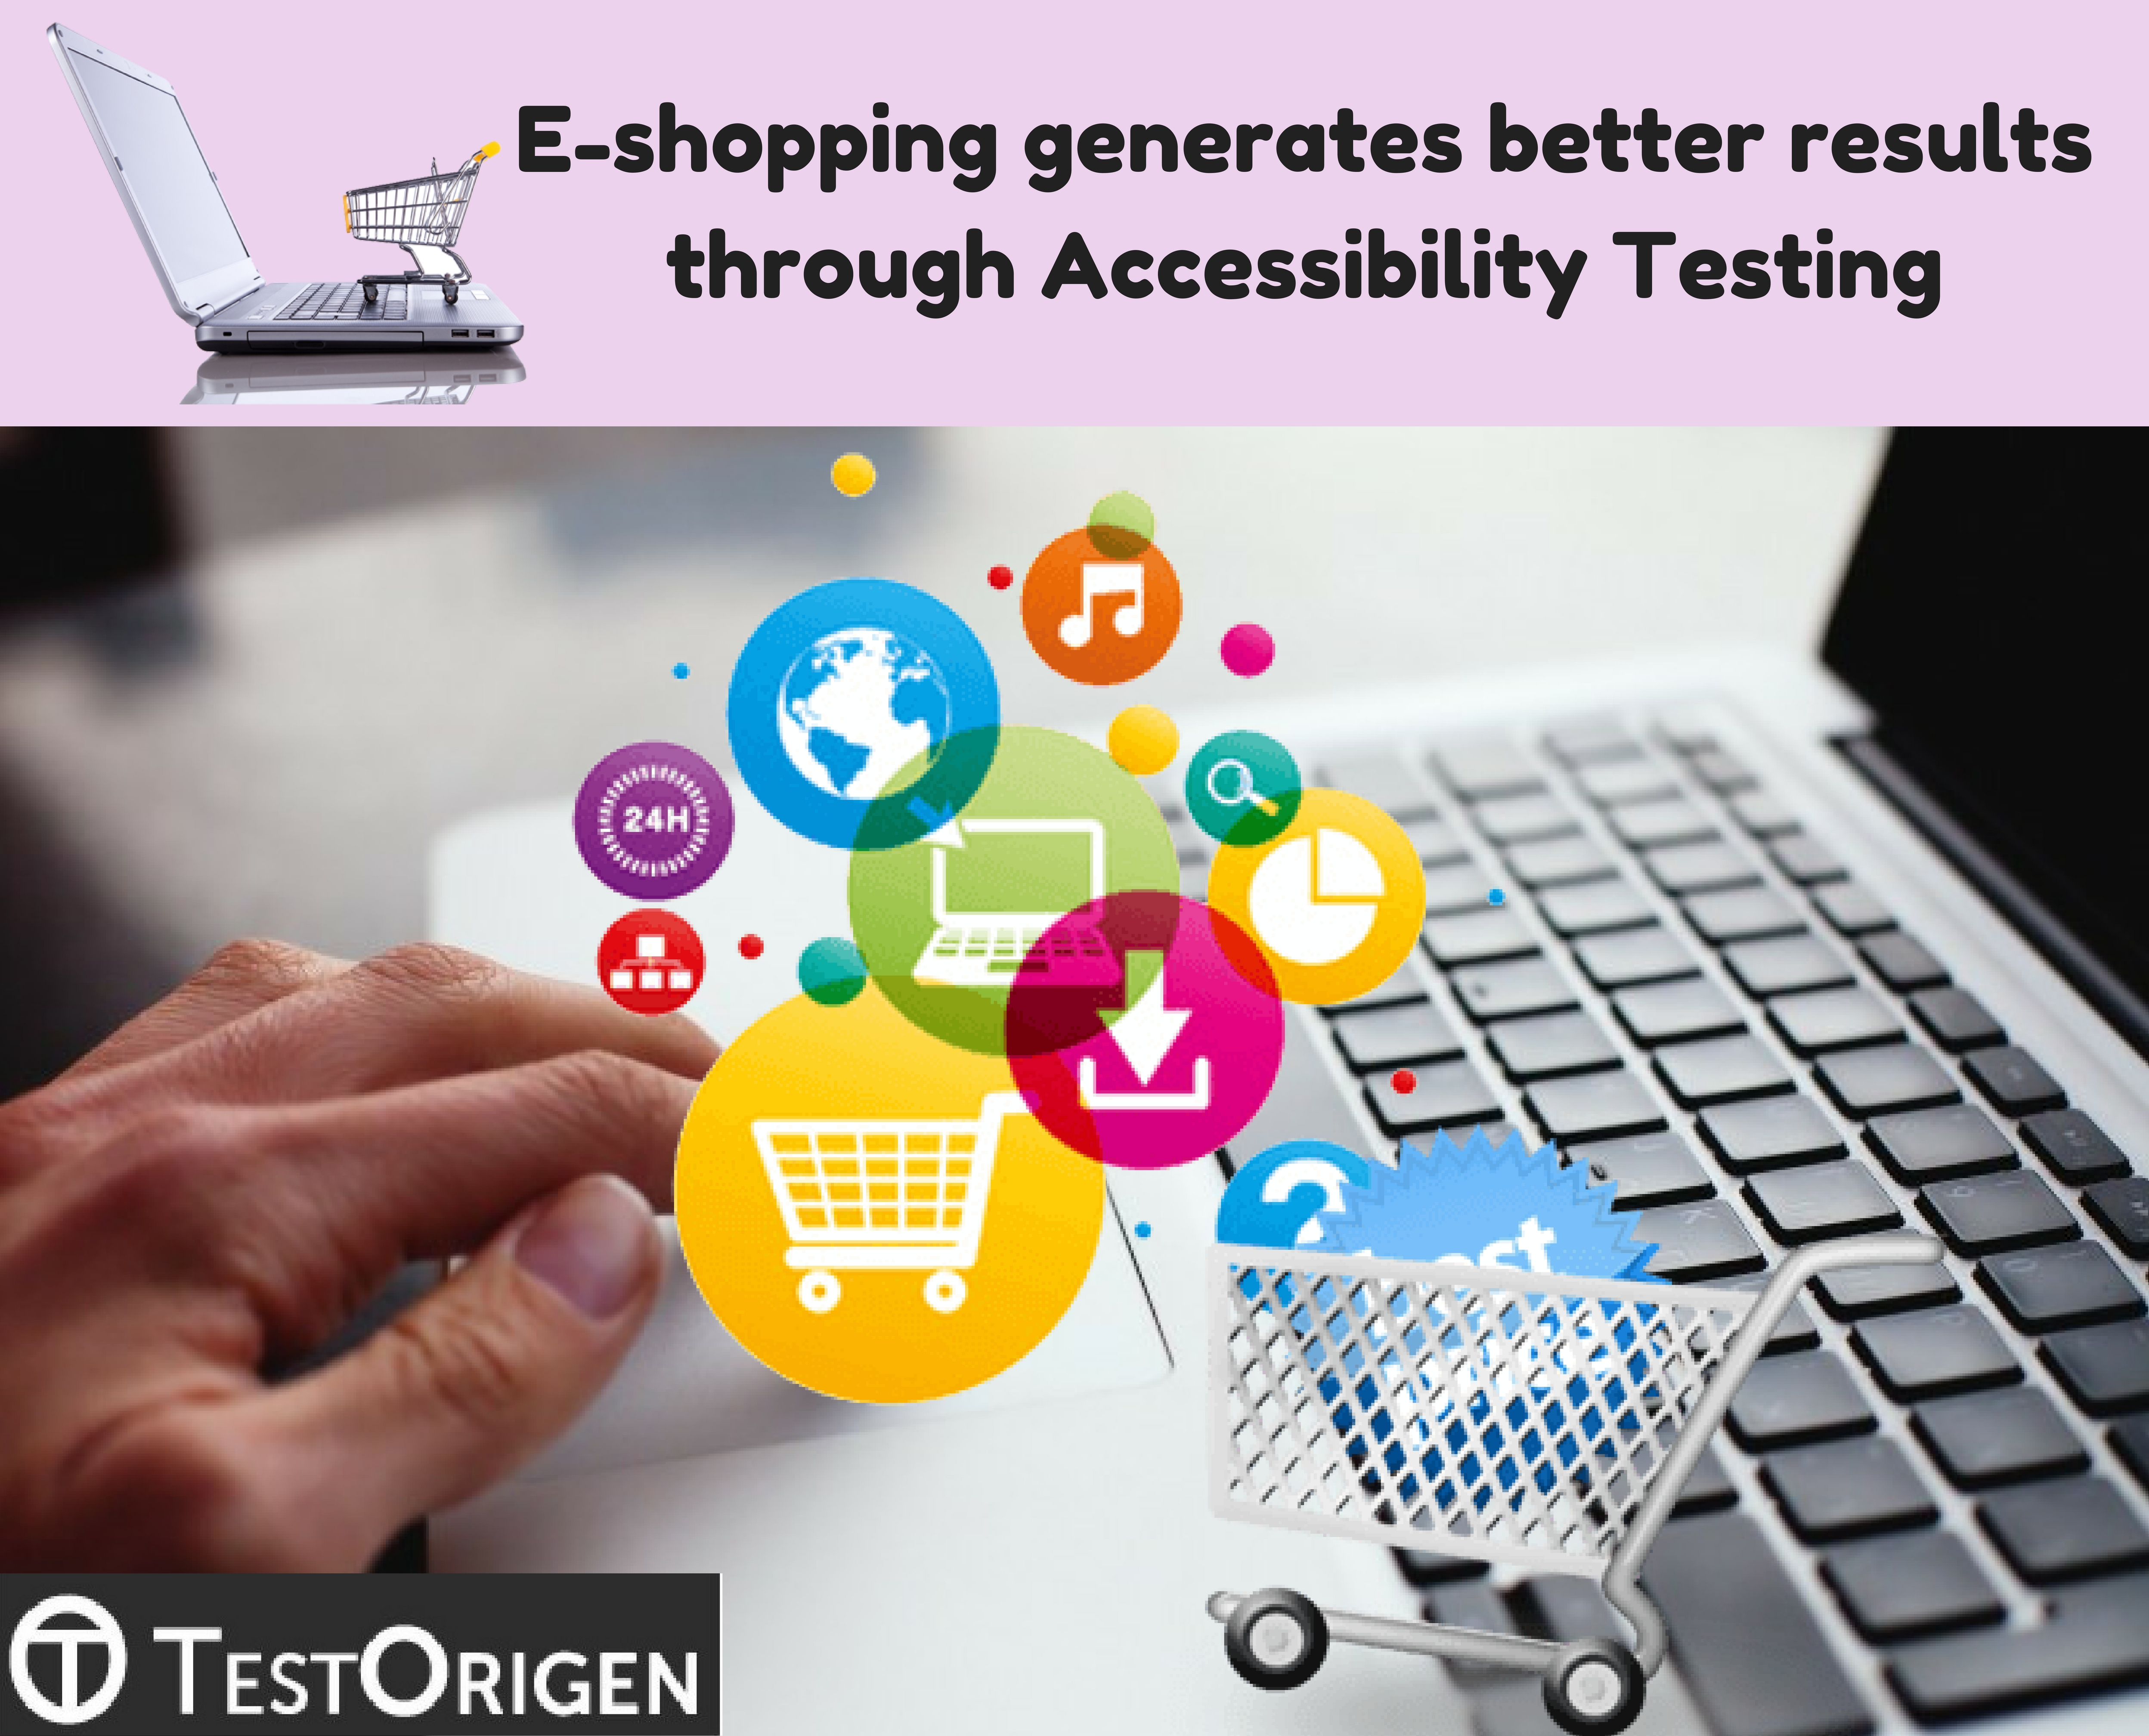 E-shopping generates better results through Accessibility Testing